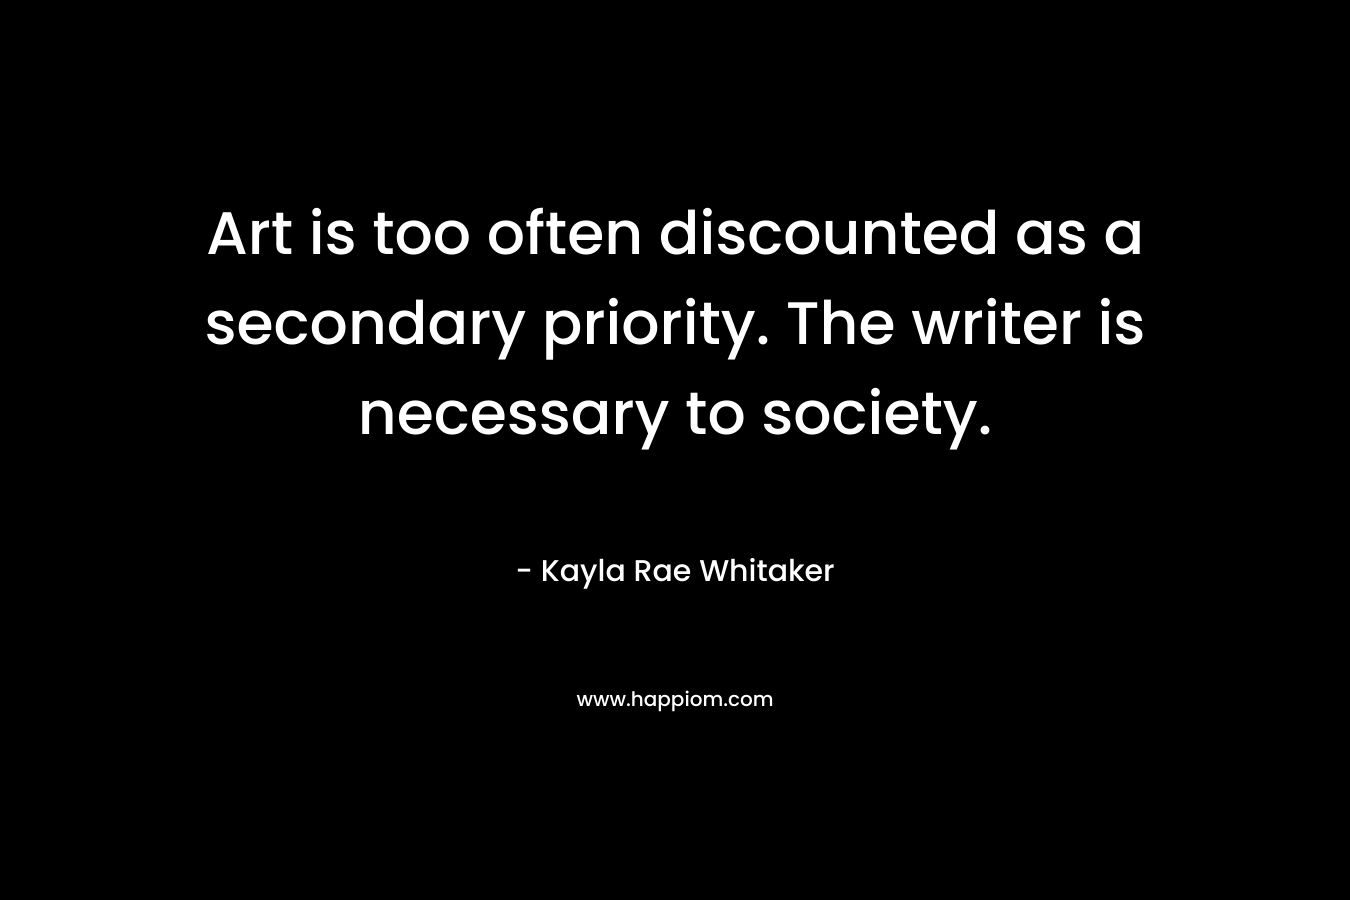 Art is too often discounted as a secondary priority. The writer is necessary to society. – Kayla Rae Whitaker